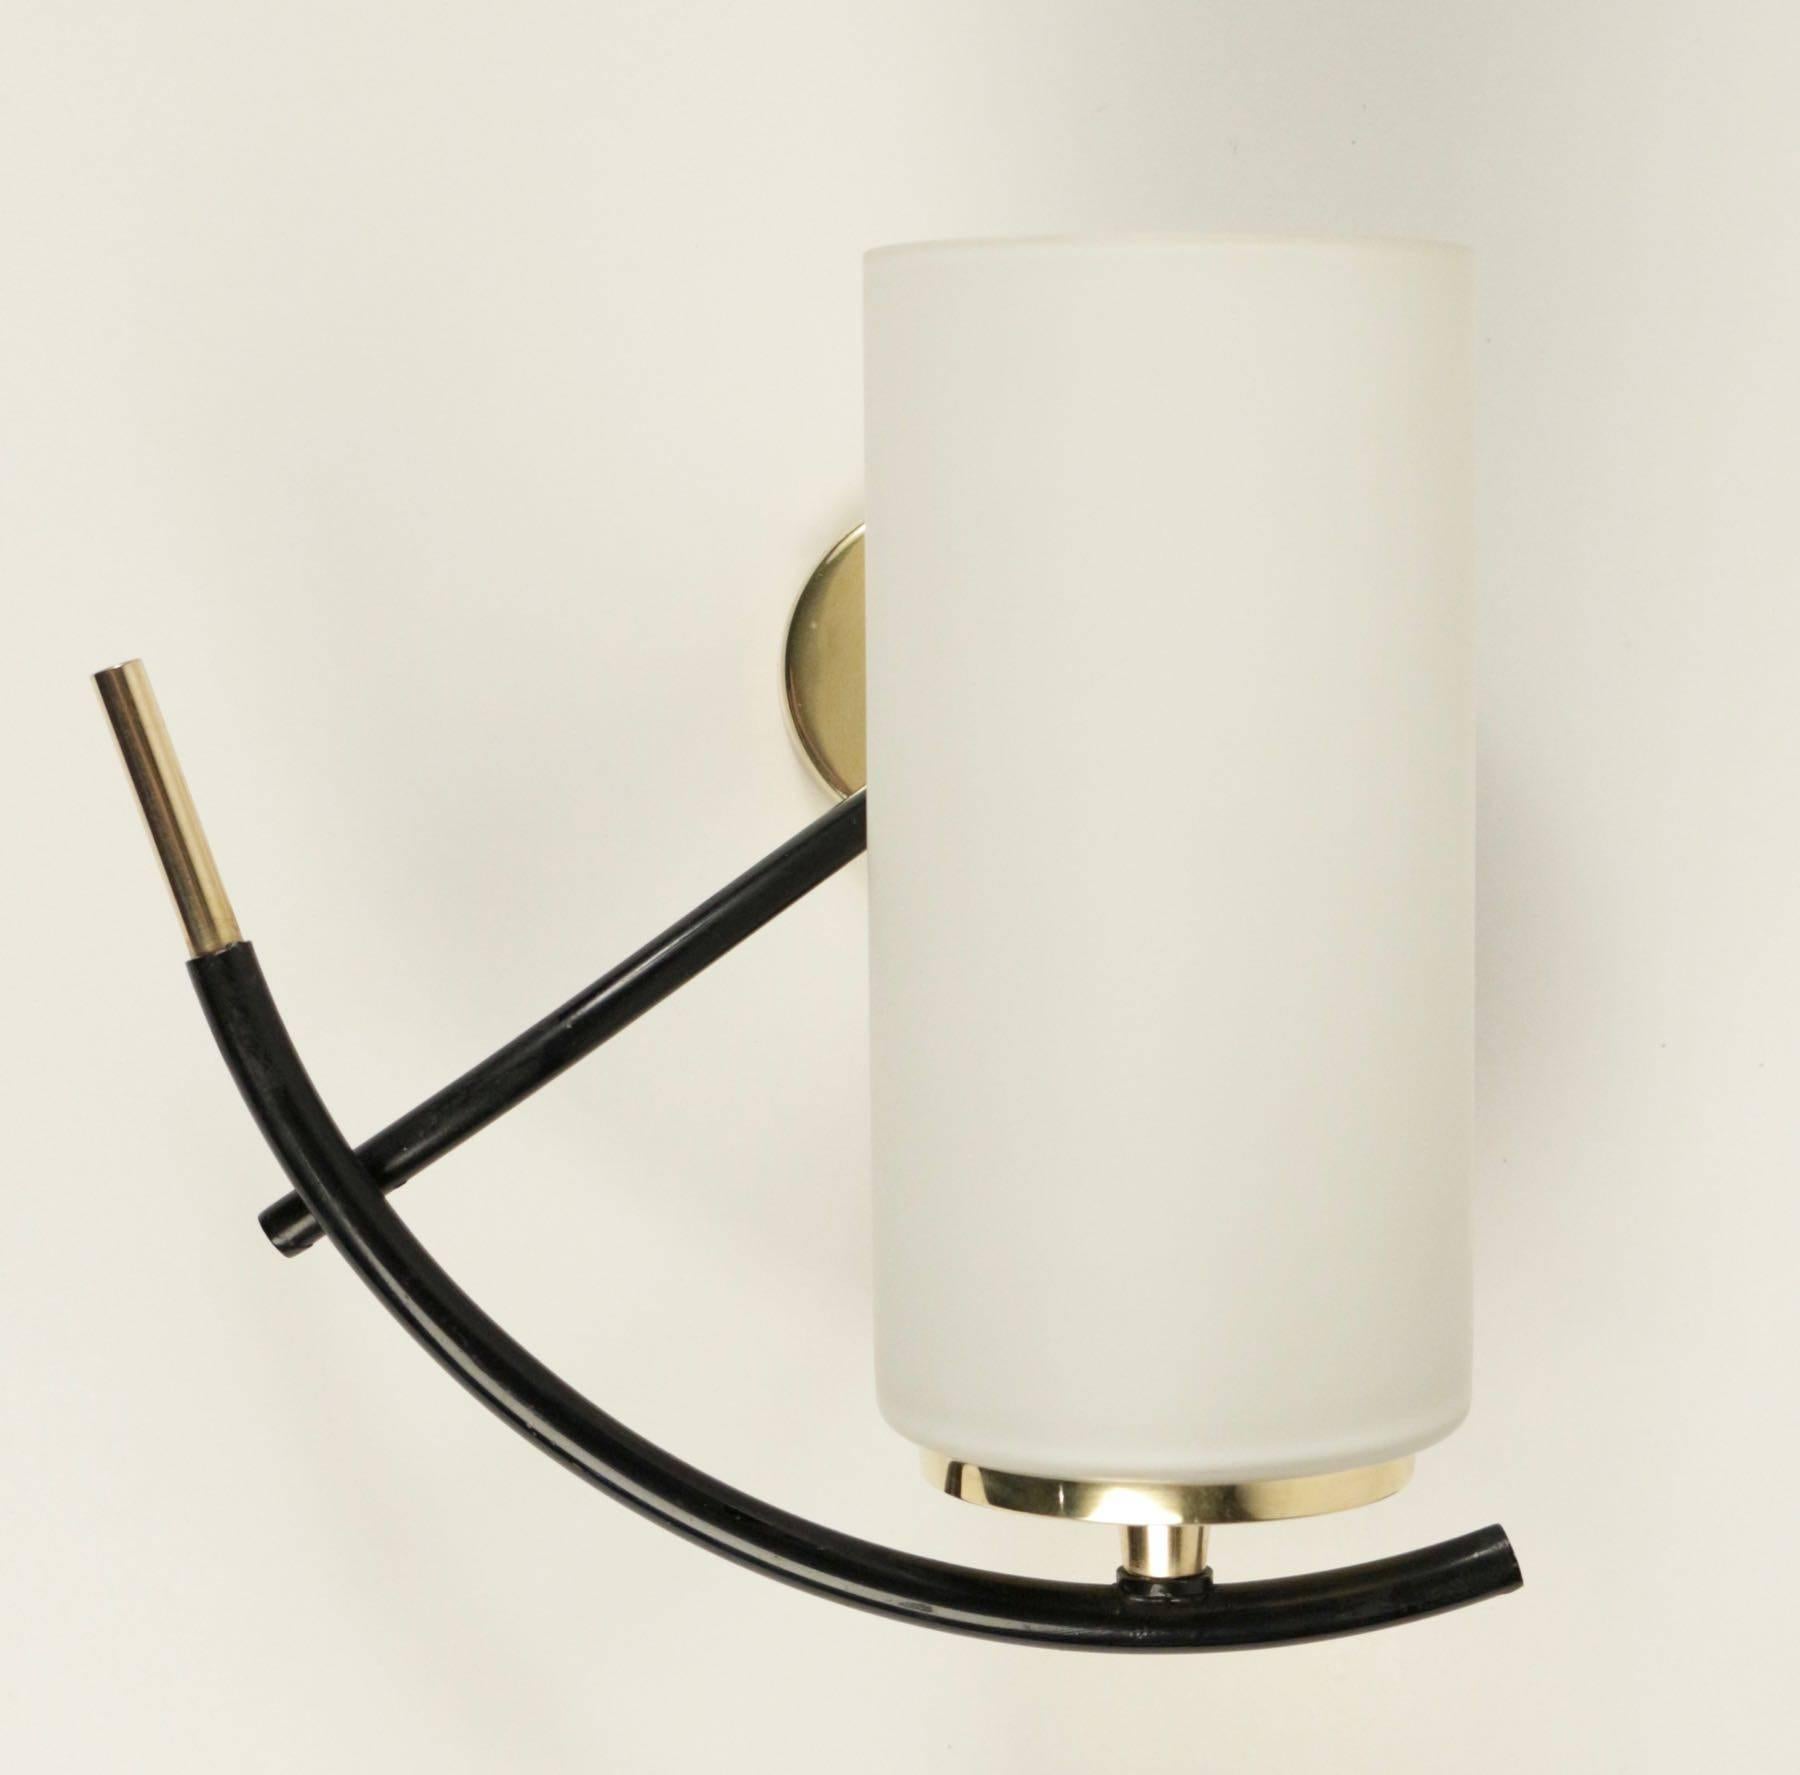 Pair of sconce by Maison Arlus, 1950.

The pair of sconce is composed by two cylindrical opaline glass lampshades mounted on curved black lacquered arm, ended by a brass rod. Round backplate made of brass.
      